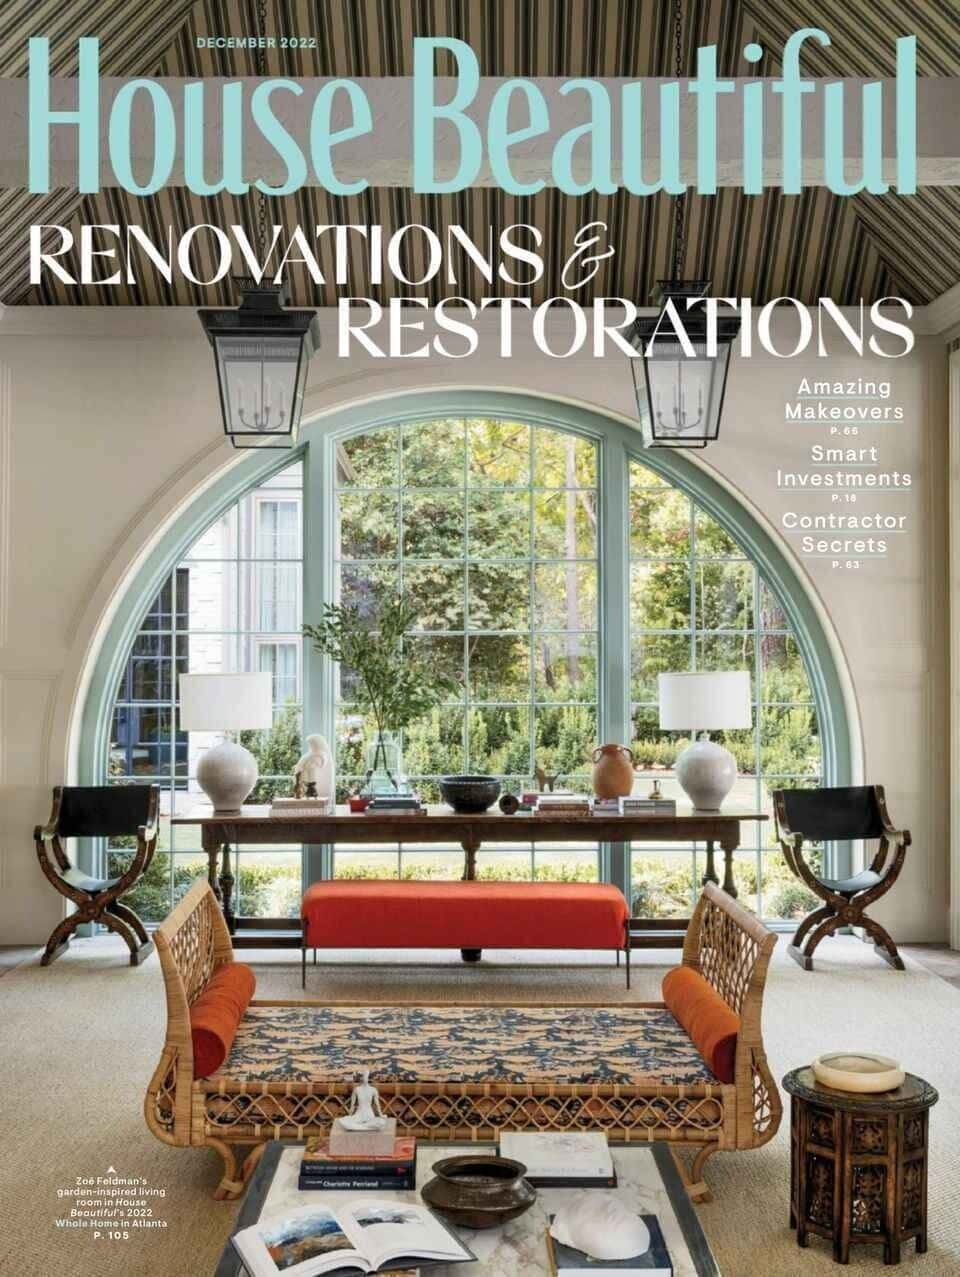 Cover of House Beautiful Magazine December 2022, renovations and restorations